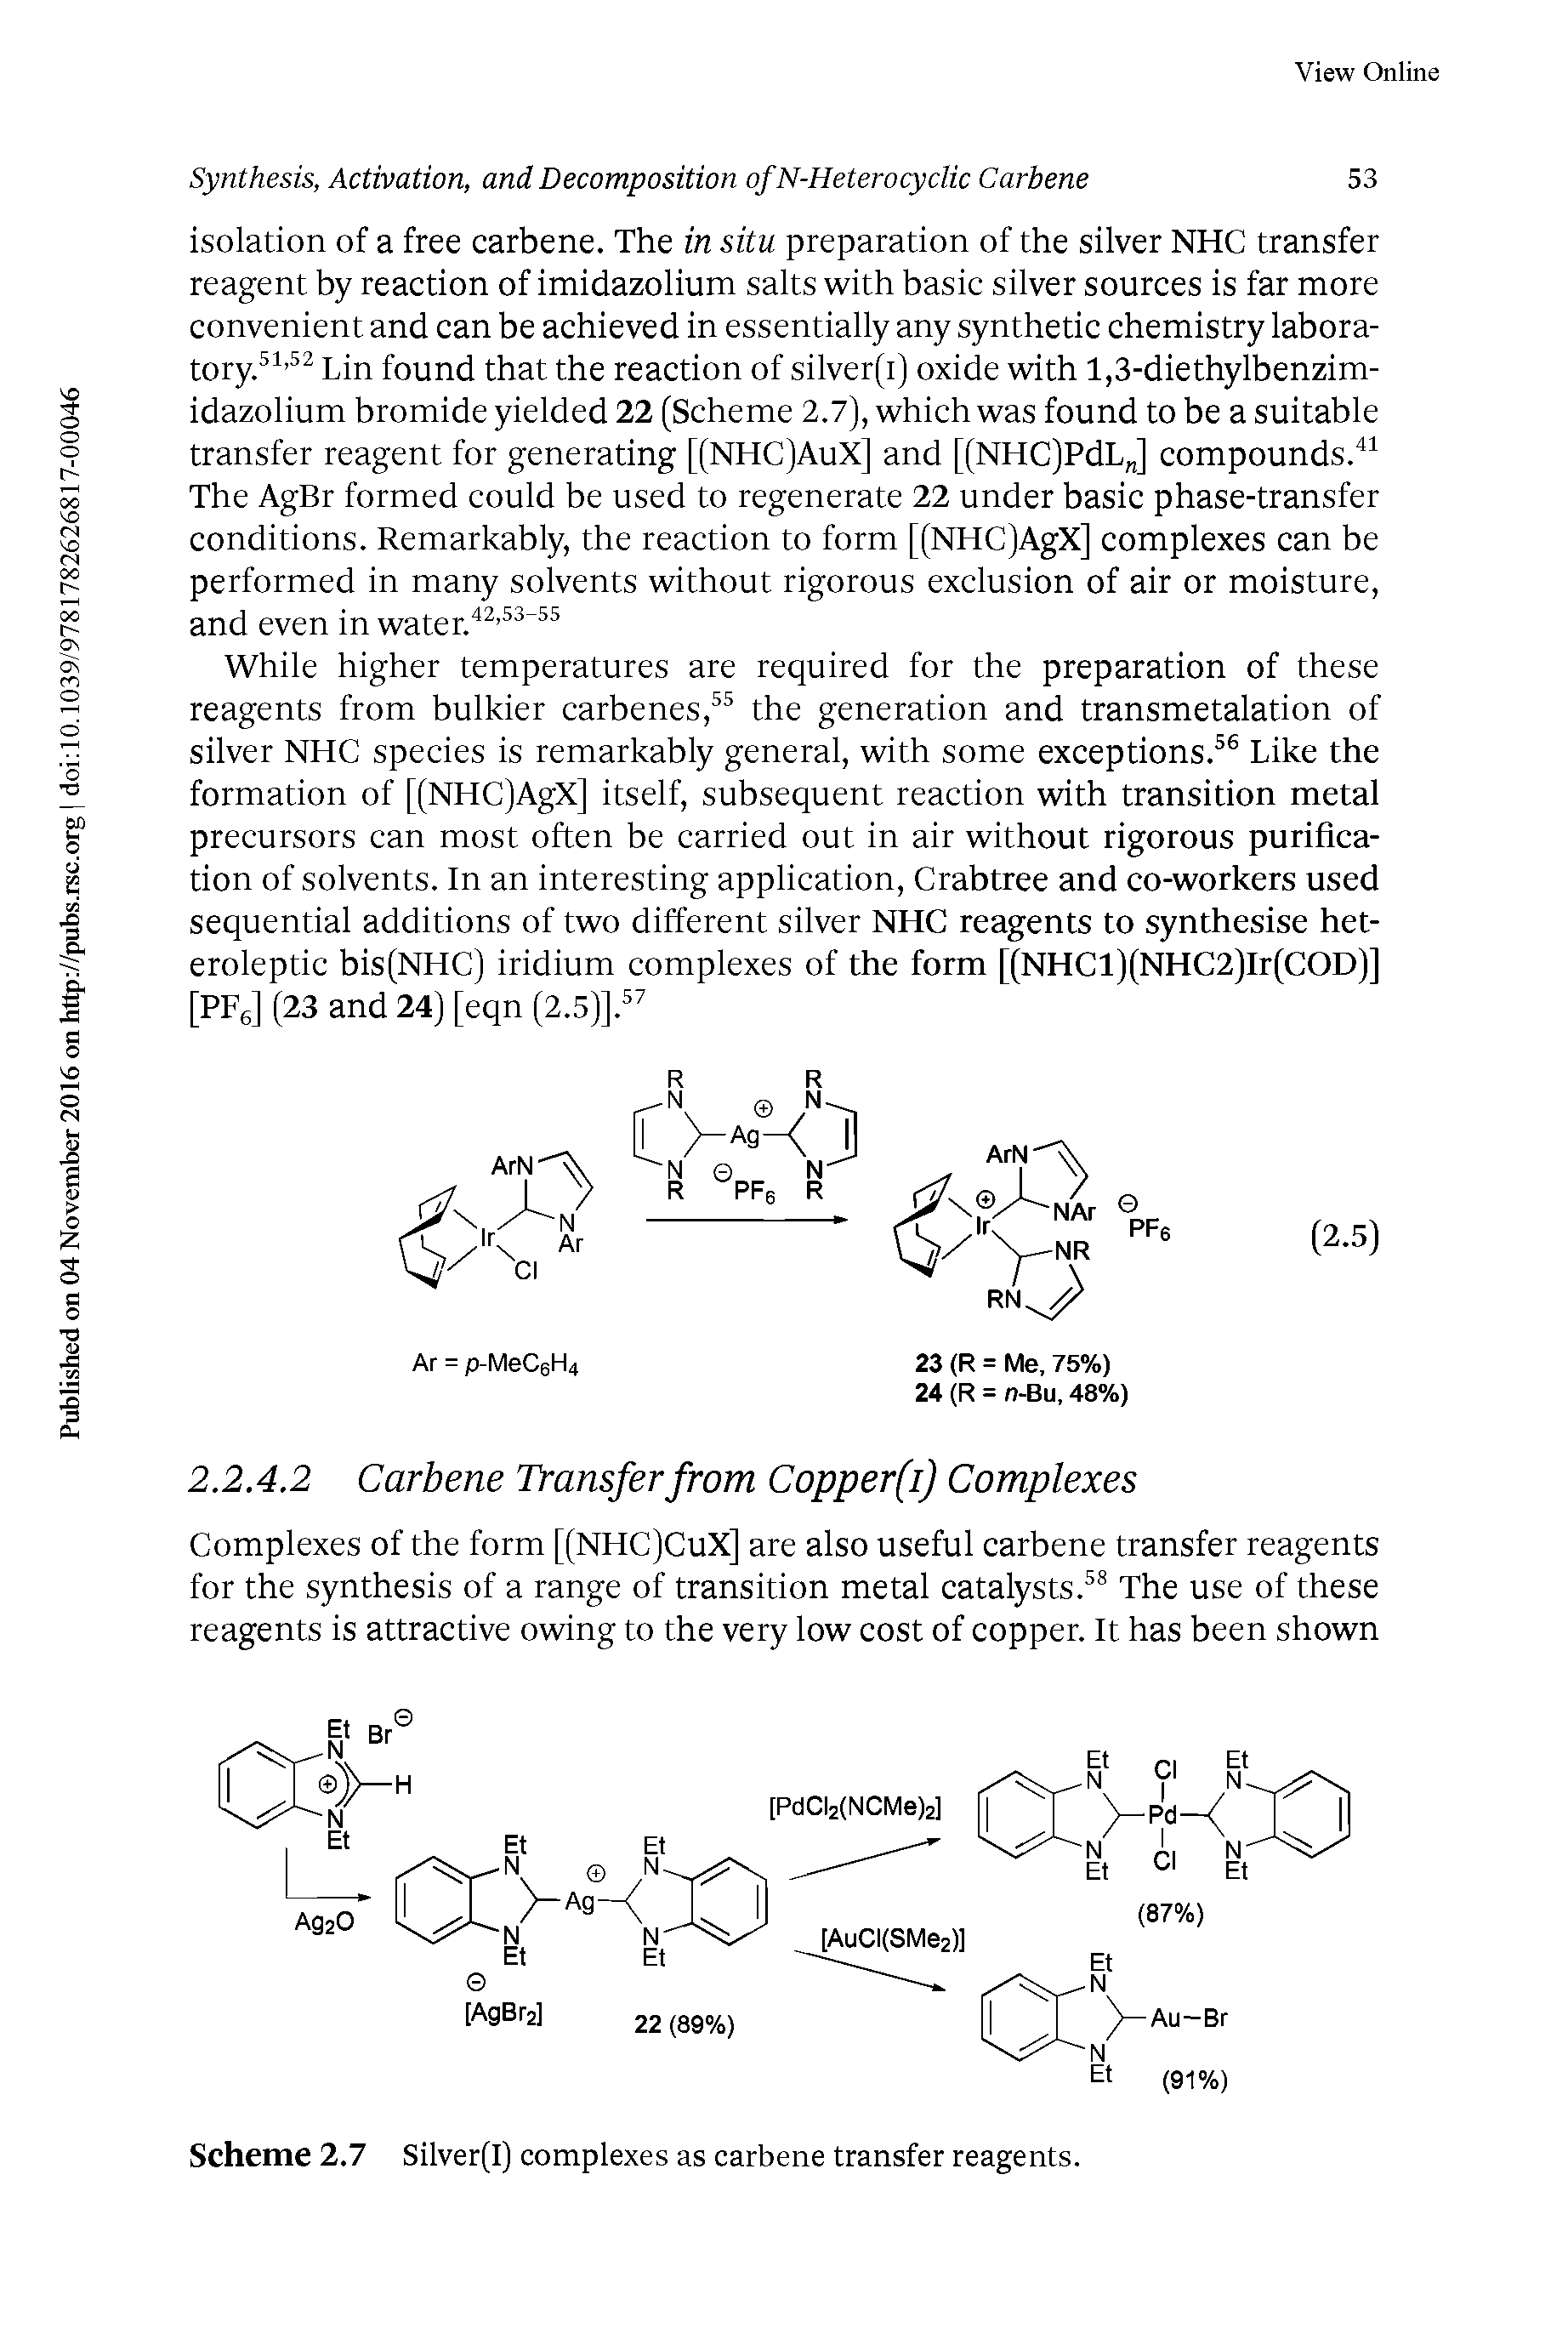 Scheme 2.7 Silver(I) complexes as carbene transfer reagents.